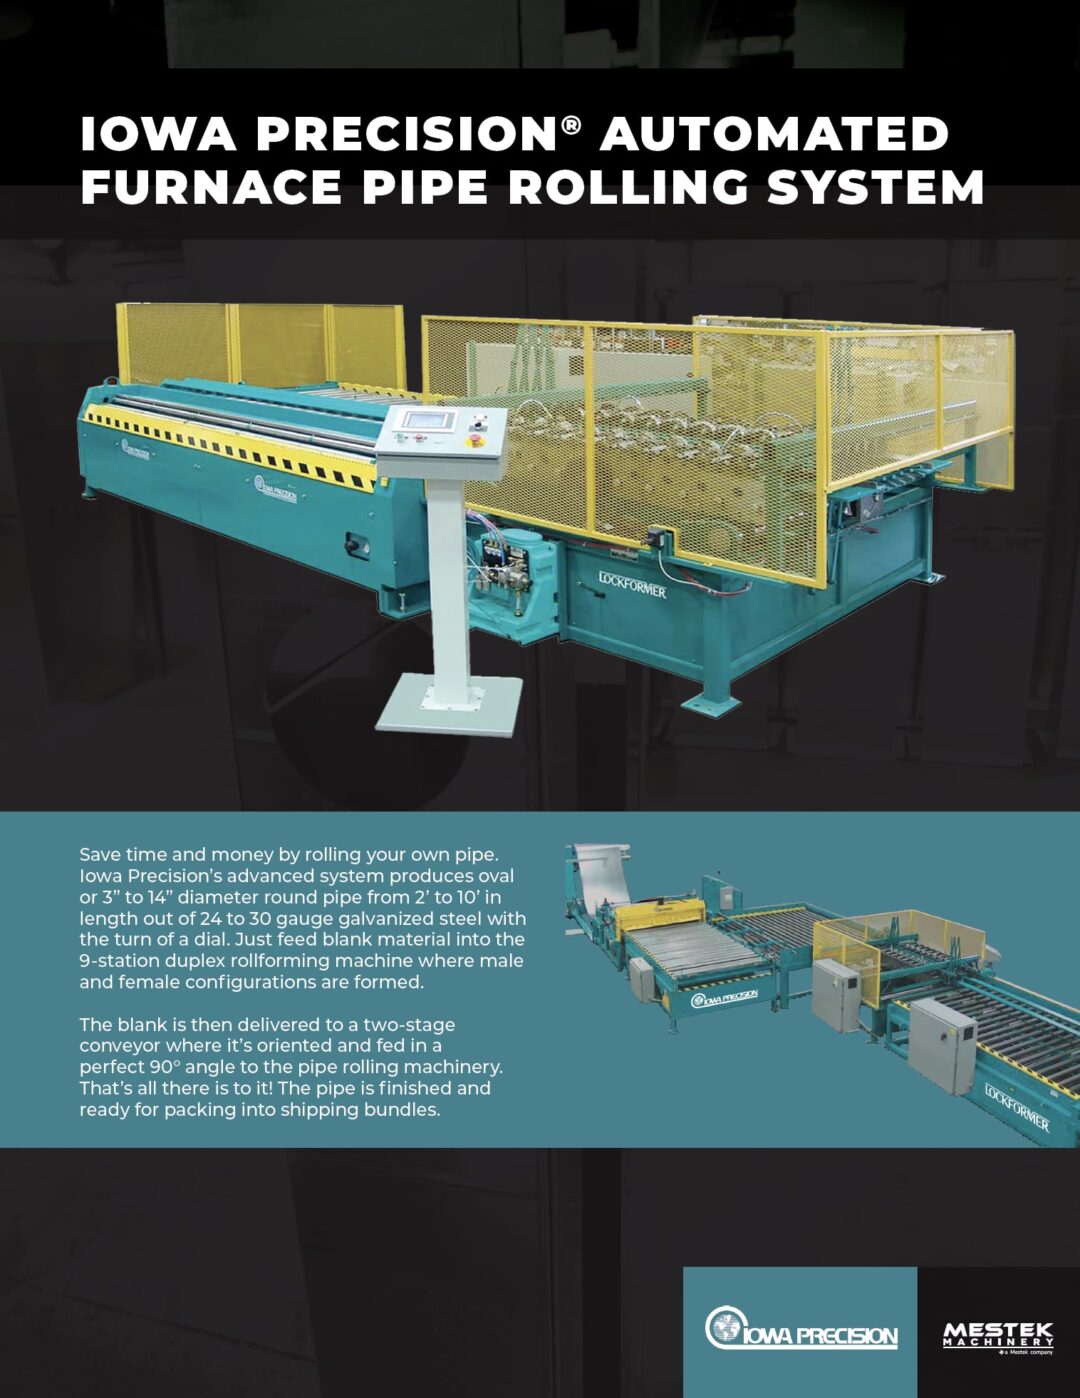 Brochure: Iowa Precision Automated Furnace Pipe Rolling System